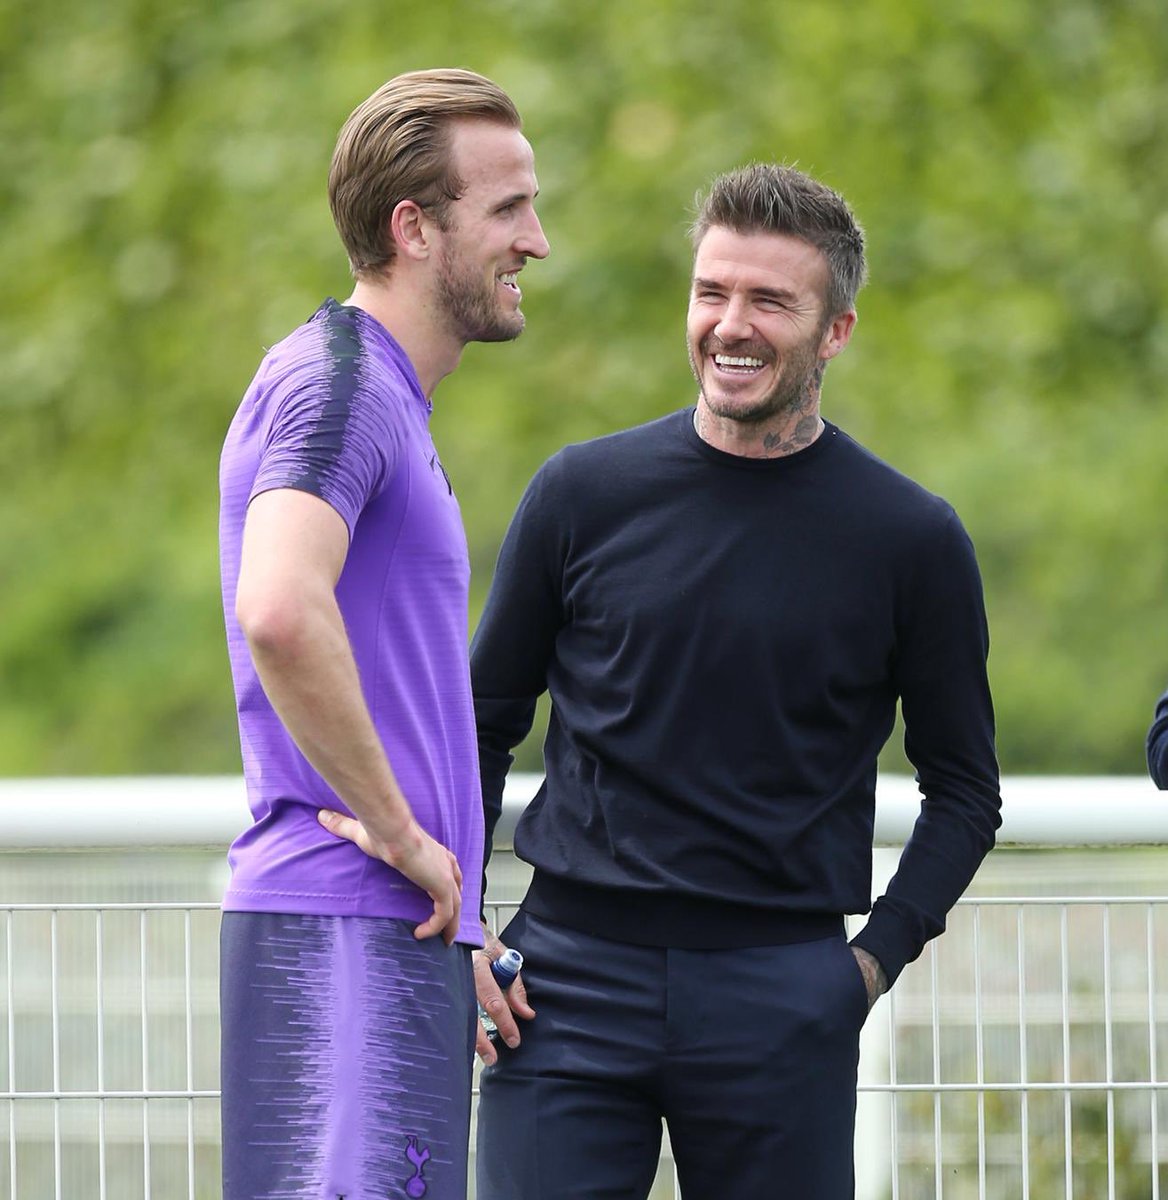 Harry Kane on Twitter: "Great to spend some time with ...